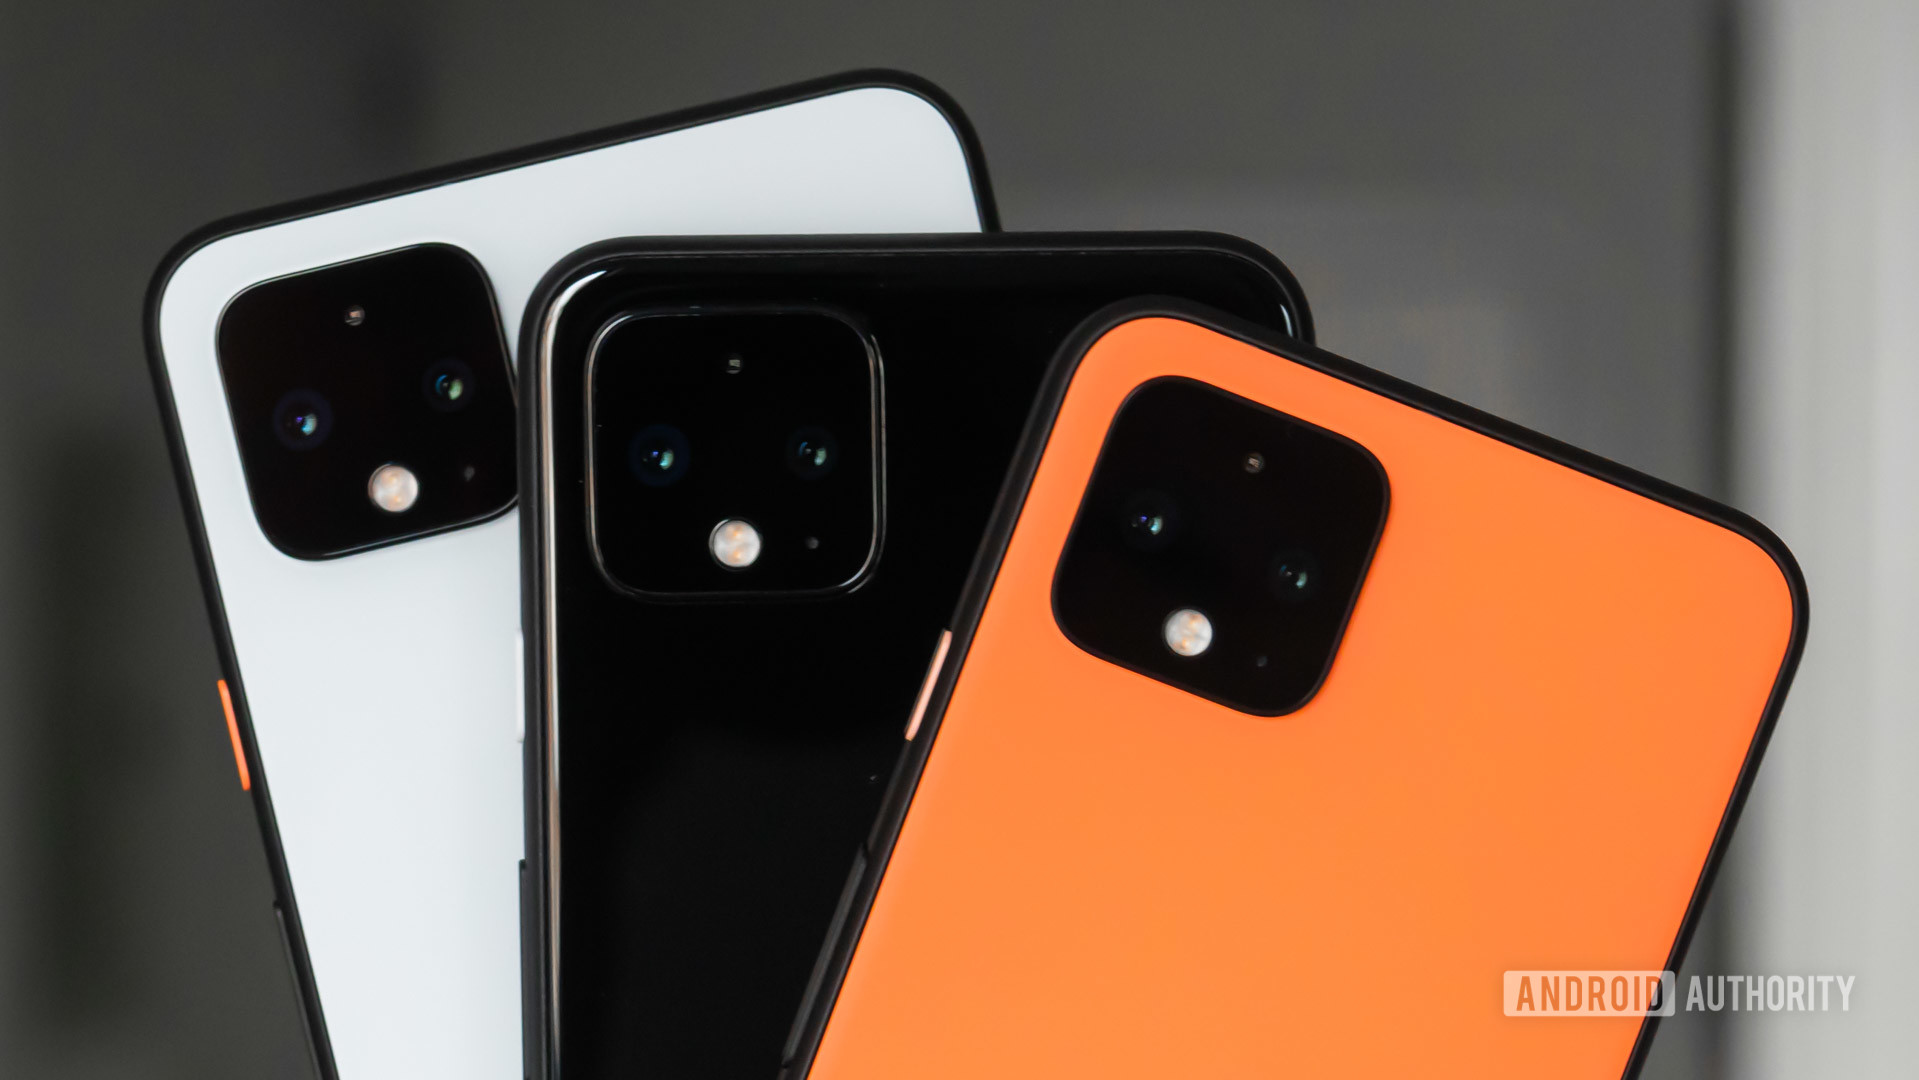 Pixel 4 colors and close up of the camera